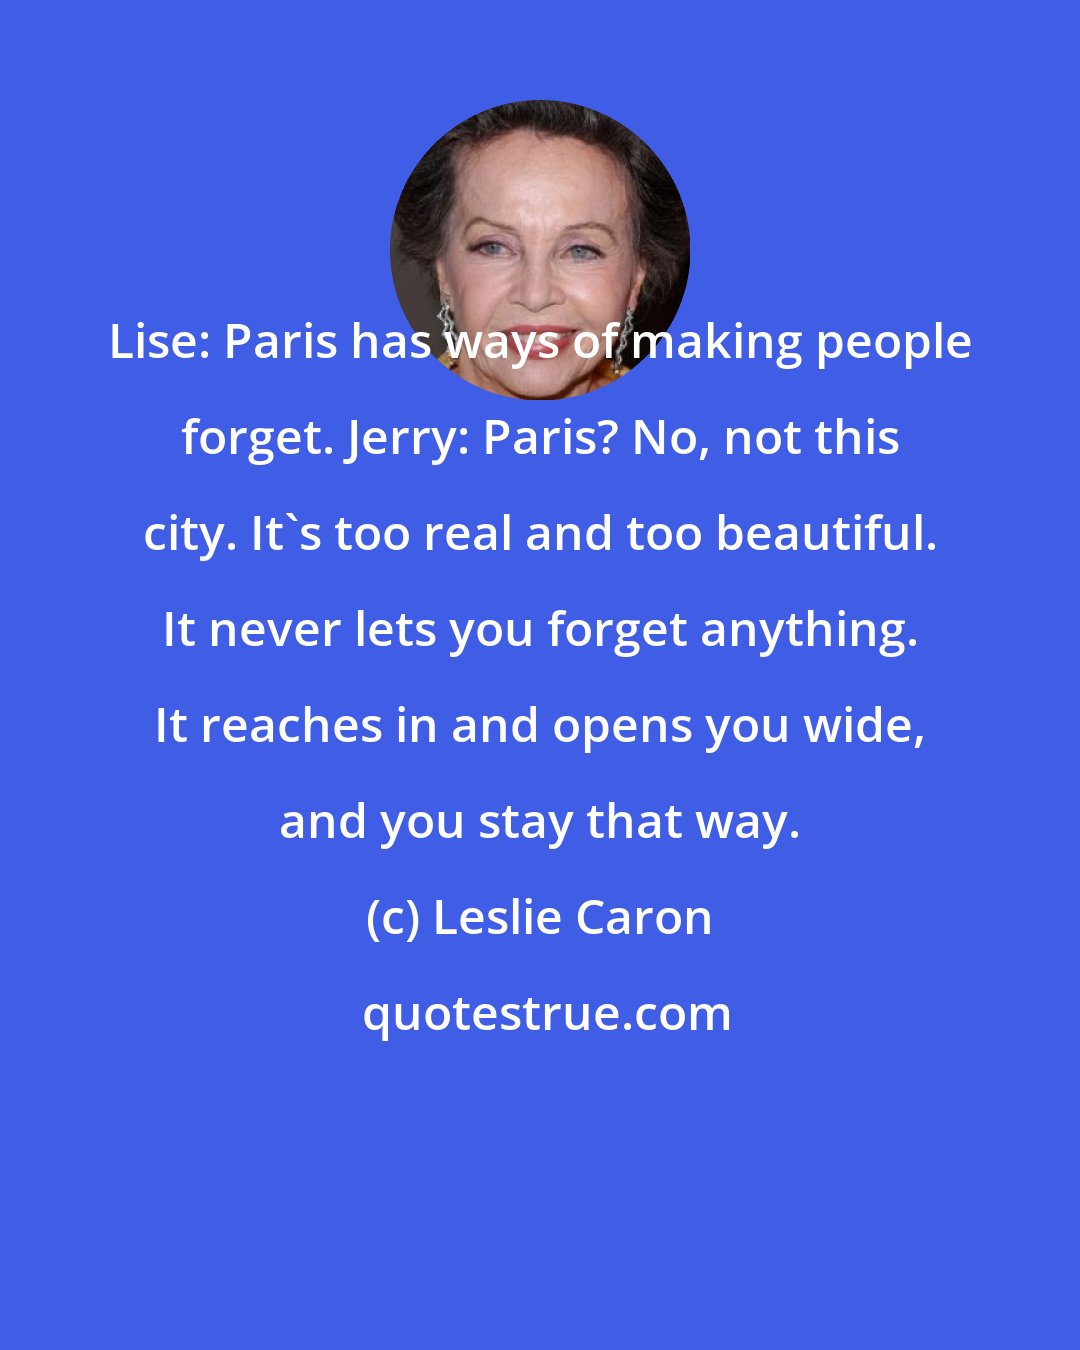 Leslie Caron: Lise: Paris has ways of making people forget. Jerry: Paris? No, not this city. It's too real and too beautiful. It never lets you forget anything. It reaches in and opens you wide, and you stay that way.